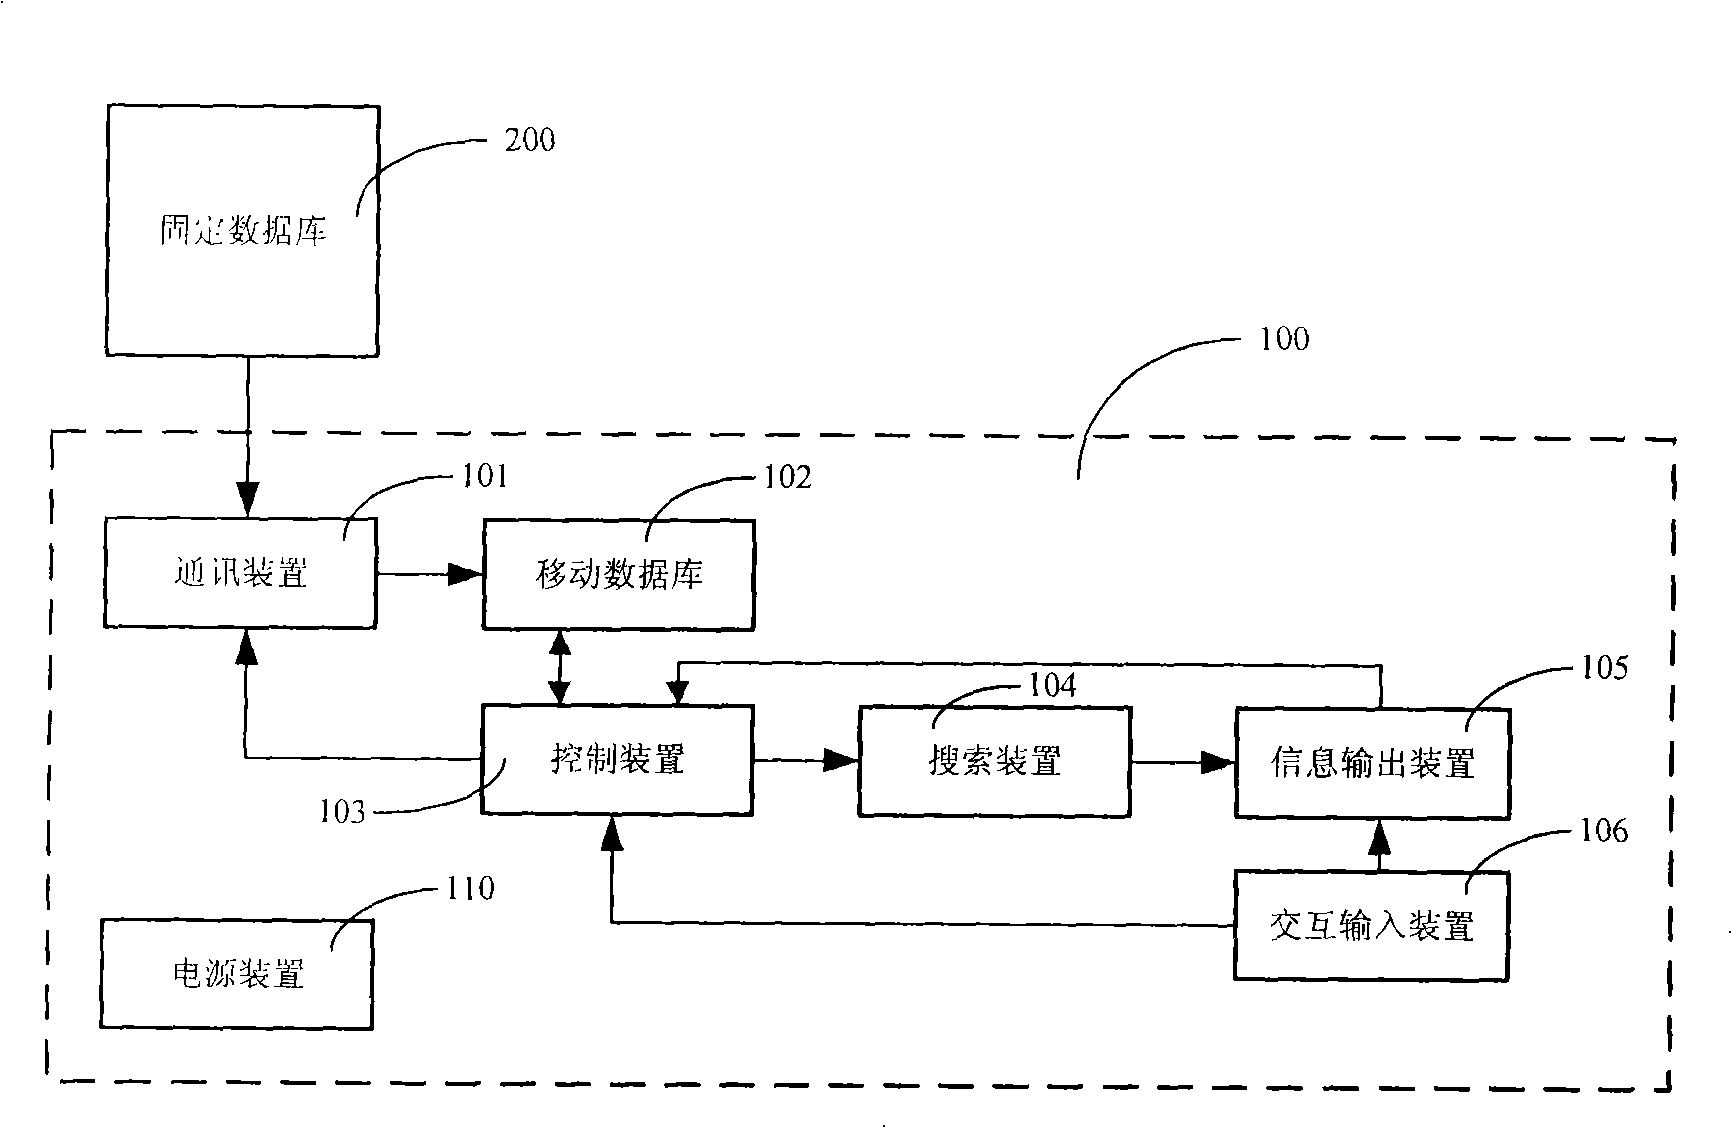 Electronic information browsing device